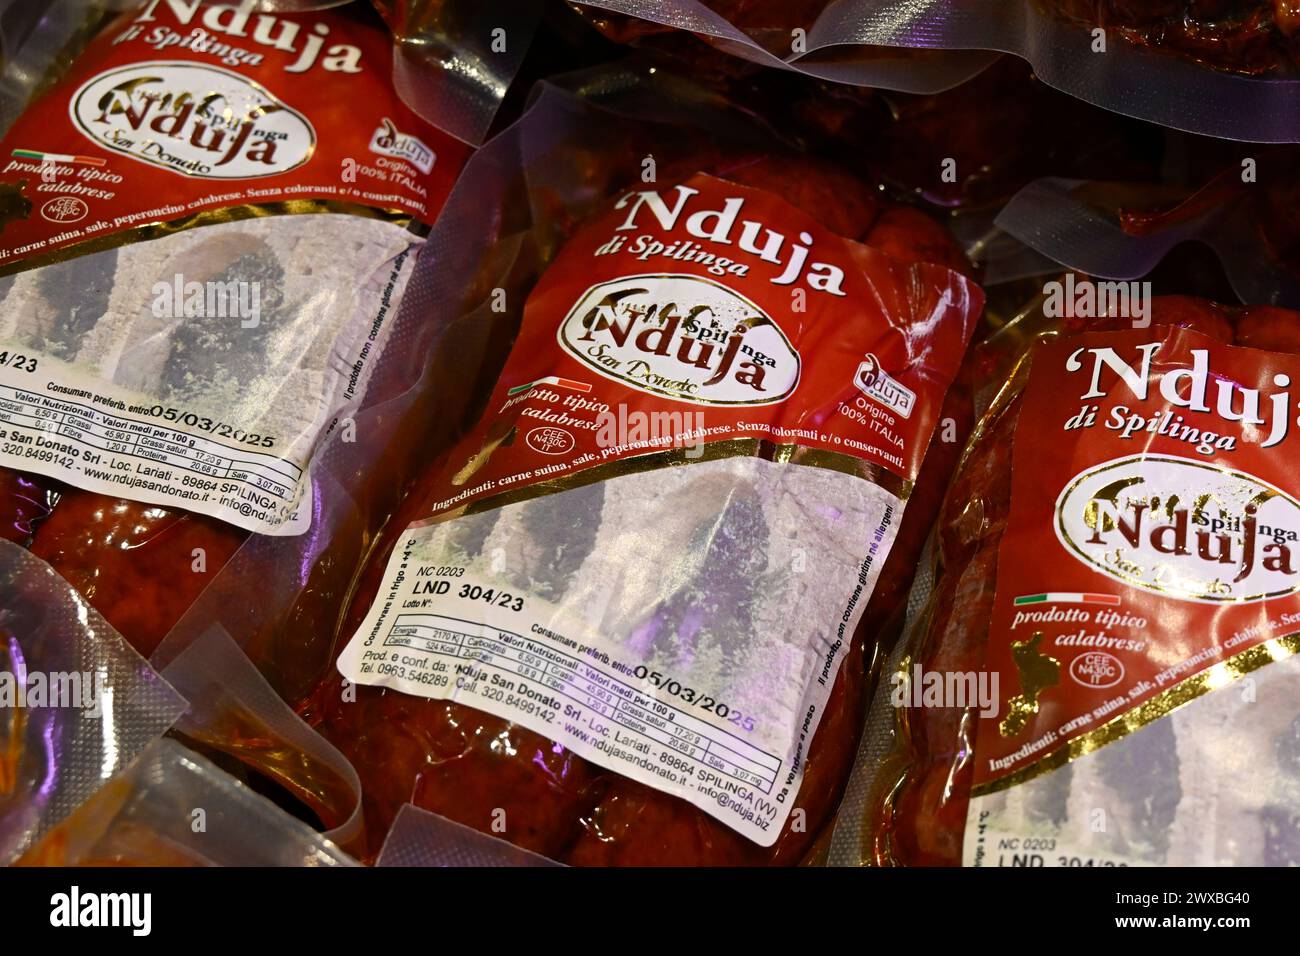 Nduja, products containing chili pepper produced in Calabria, southern Italy Stock Photo